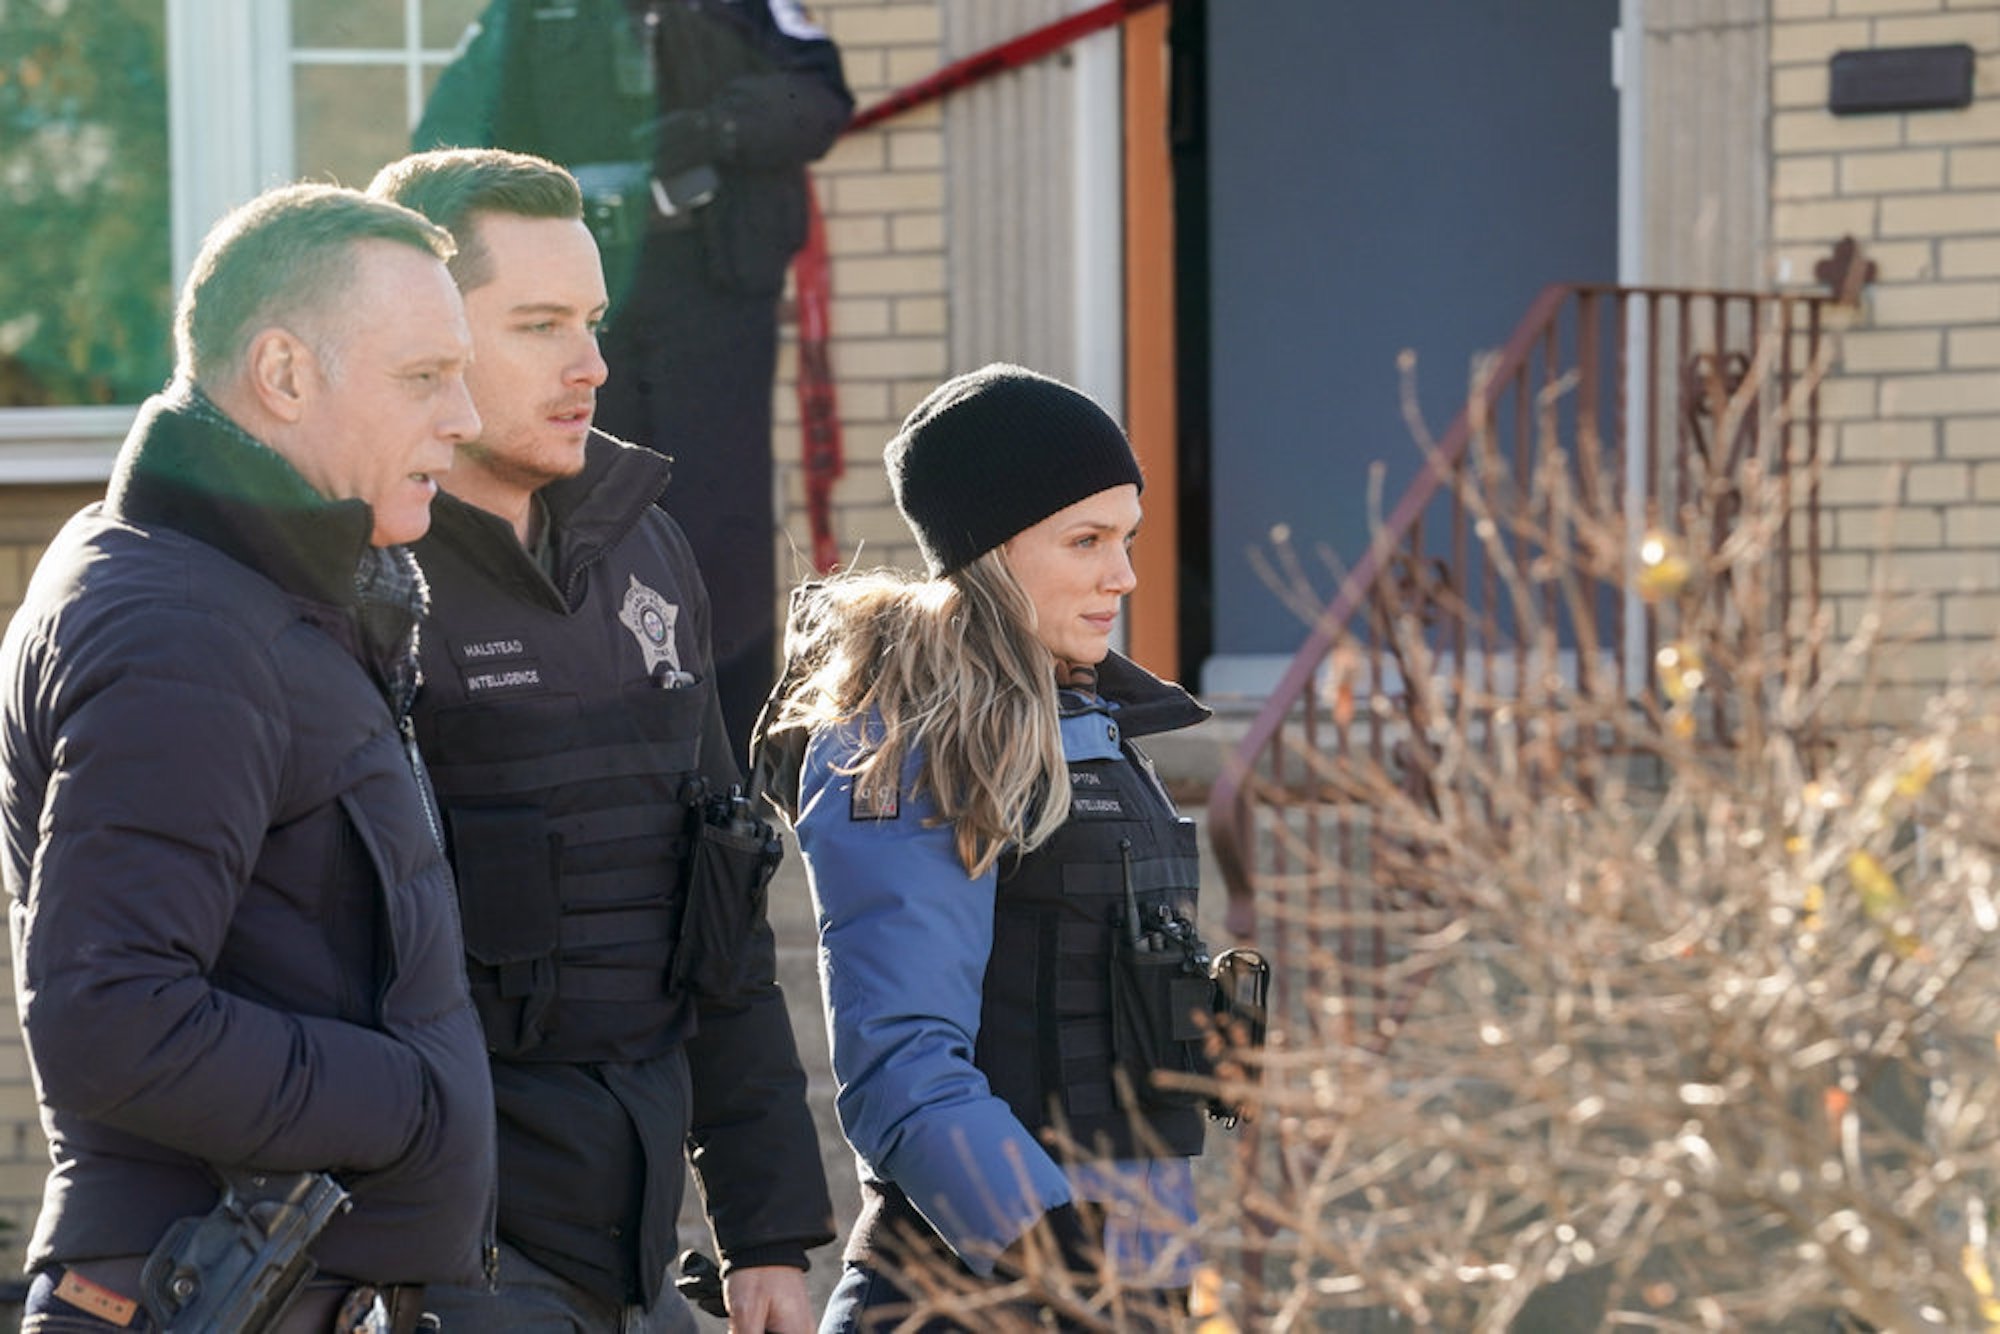 Hank Voight, Jay Halstead, and Hailey Upton outside in 'Chicago P.D.' Season 9